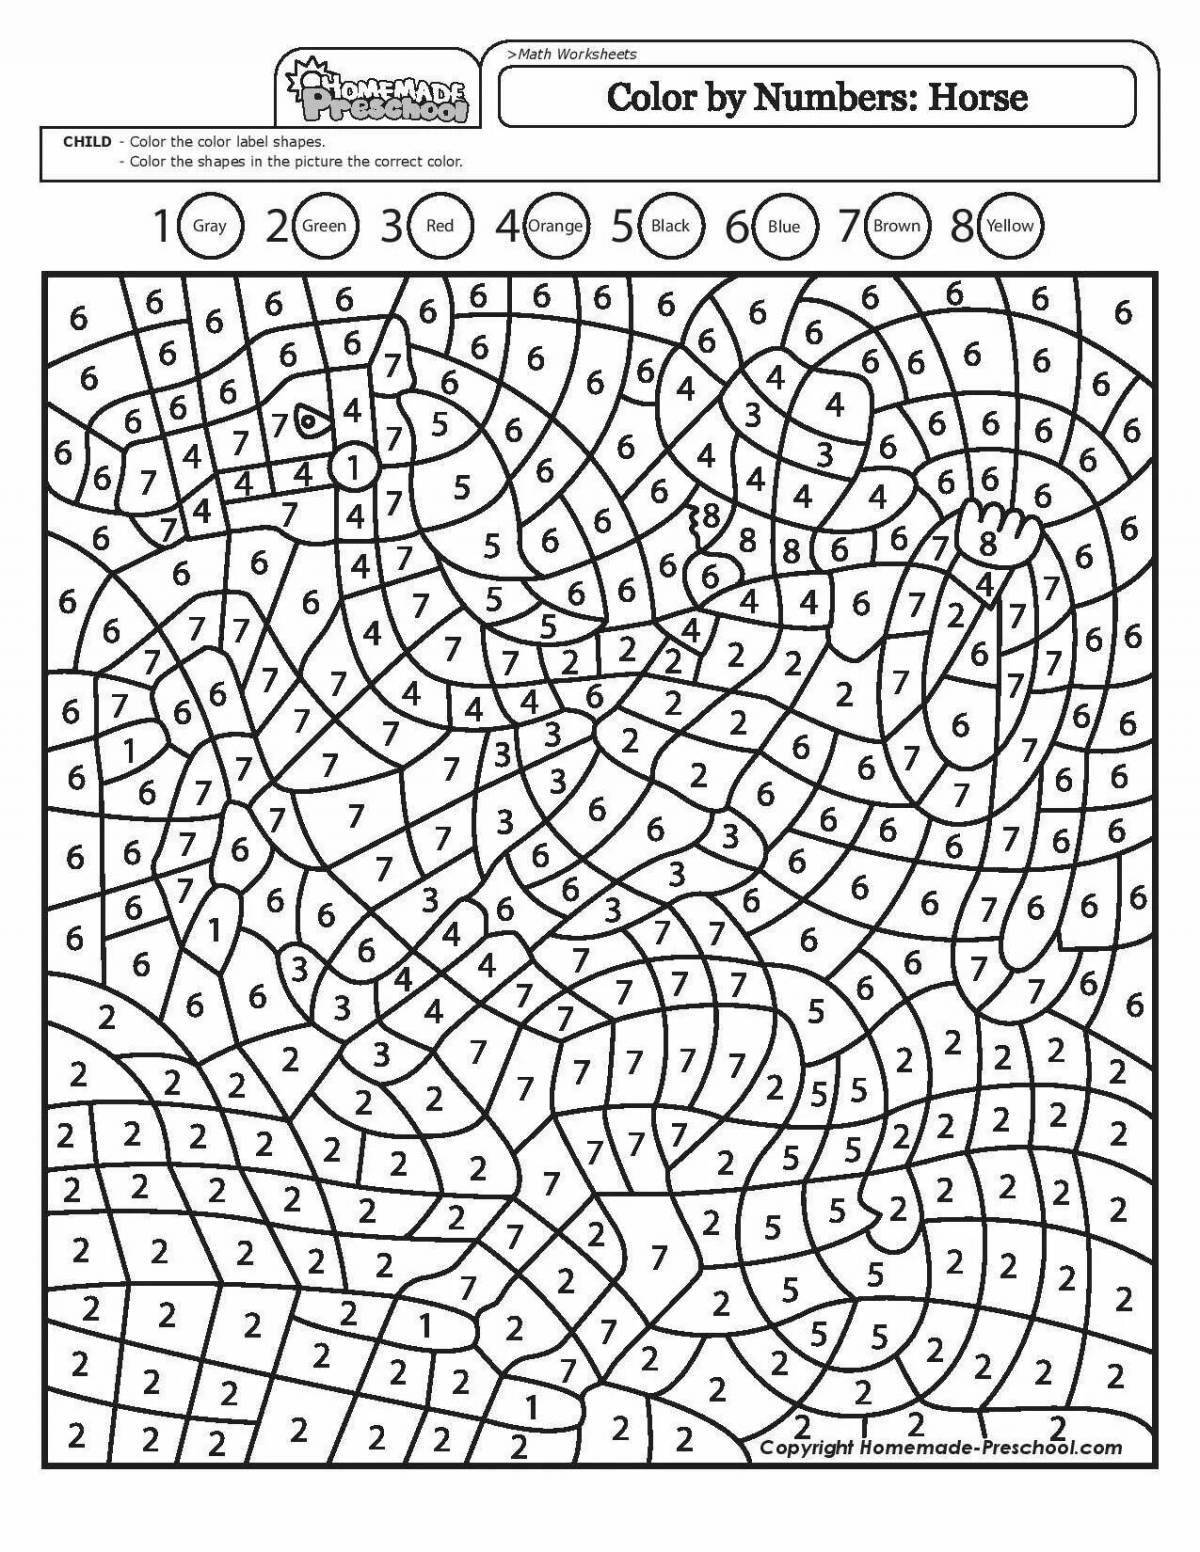 A fun coloring game with cells and numbers